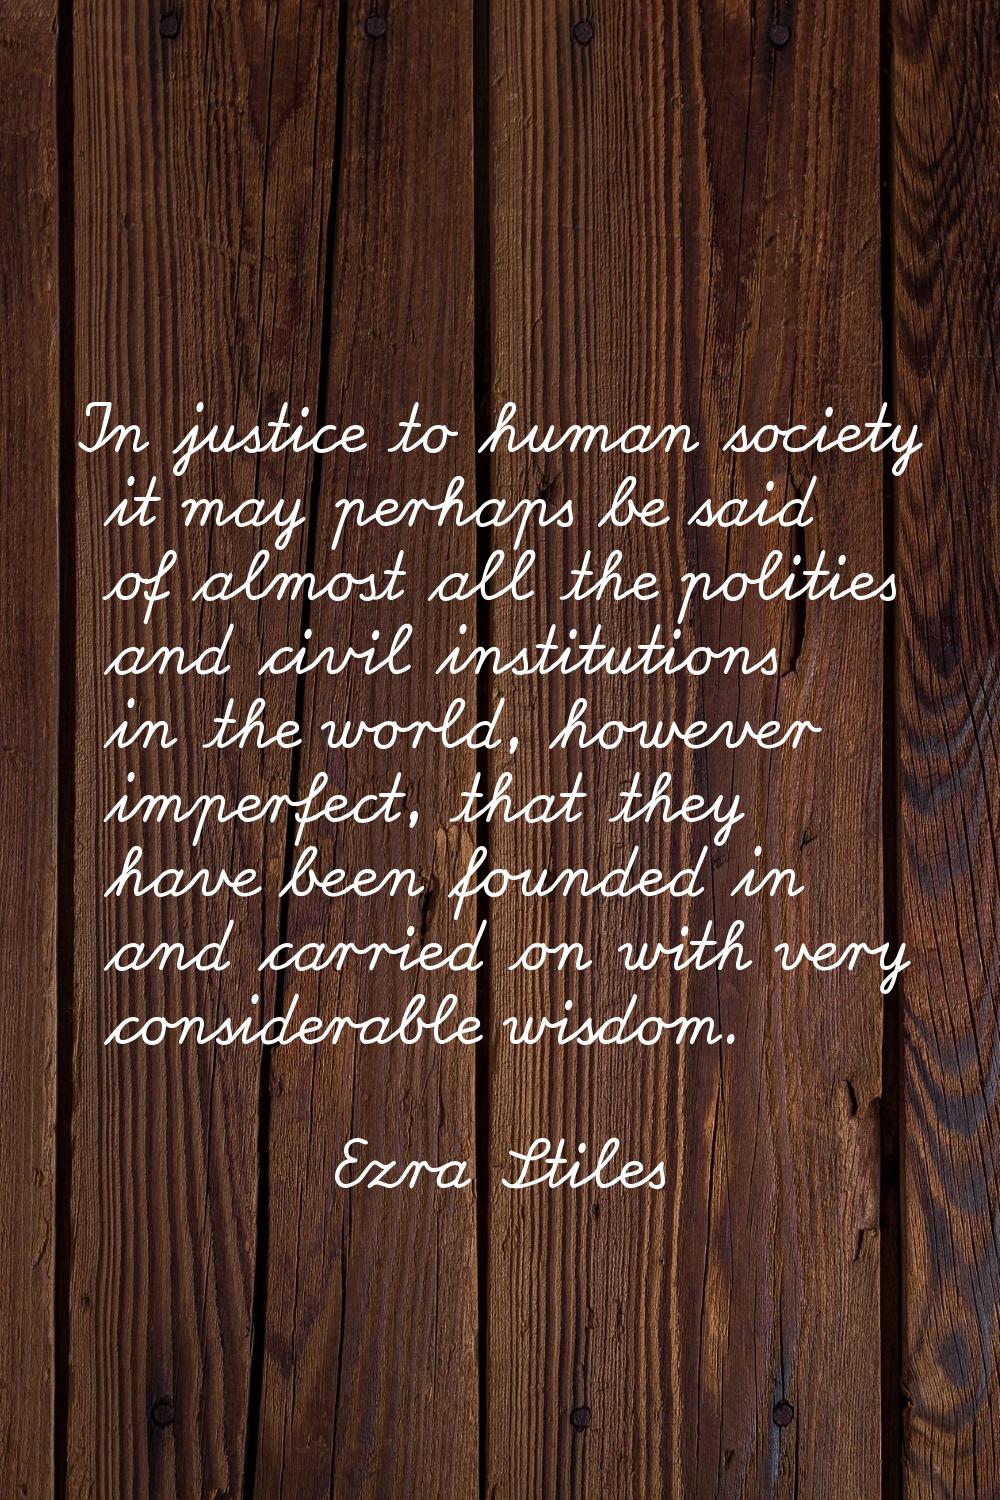 In justice to human society it may perhaps be said of almost all the polities and civil institution